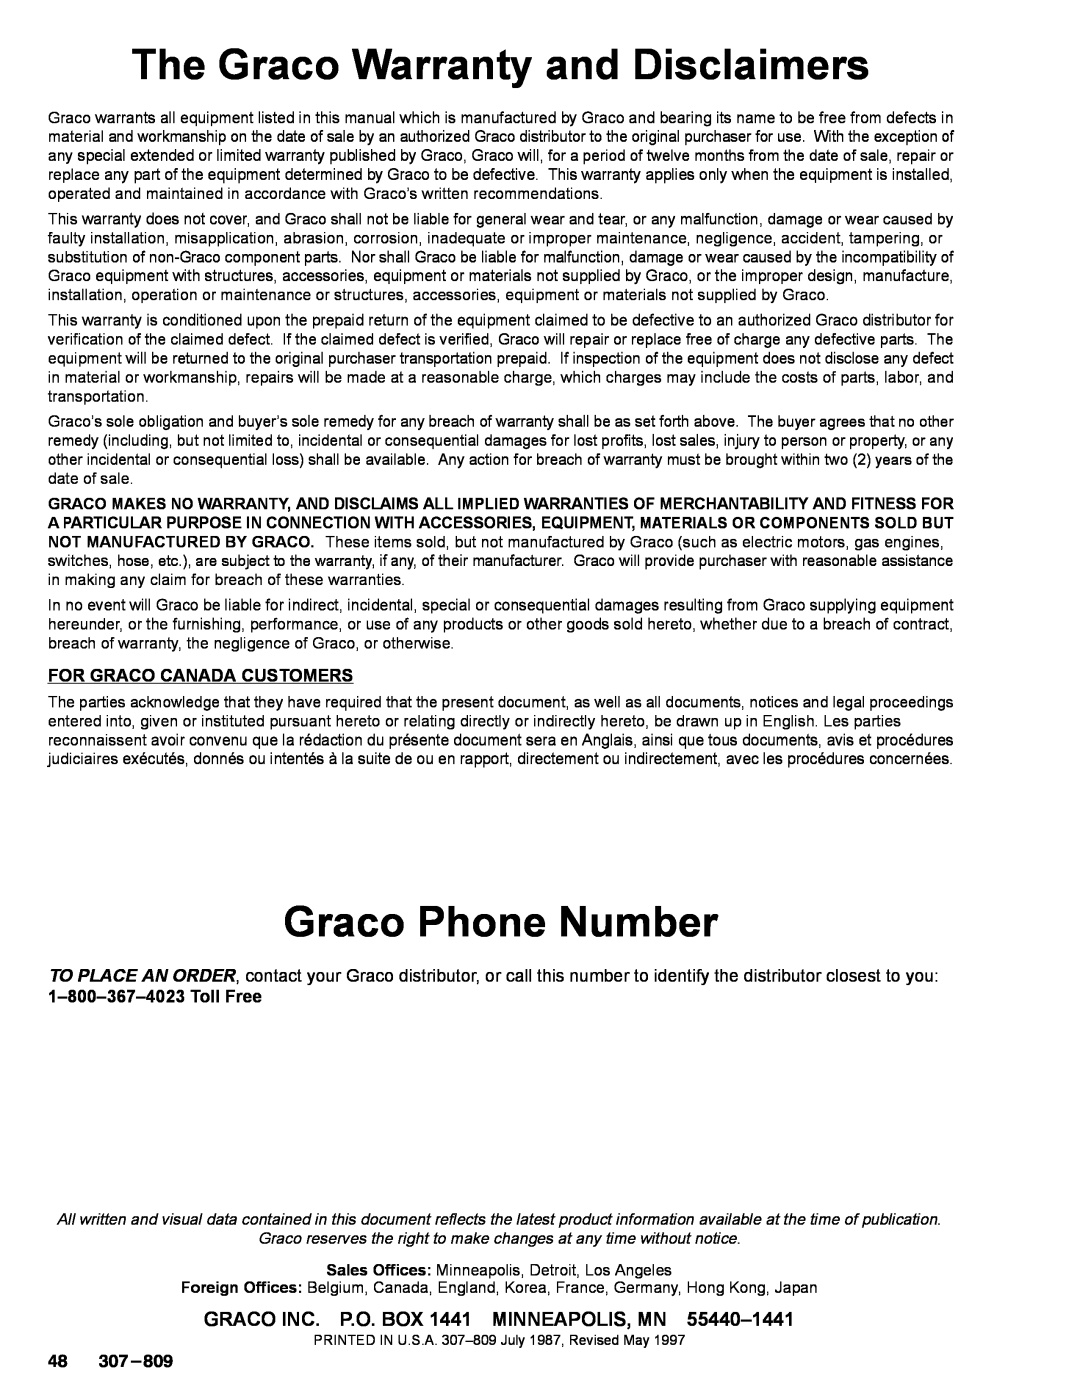 Graco 220-569 manual The Graco Warranty and Disclaimers, Graco Phone Number, For Graco Canada Customers 